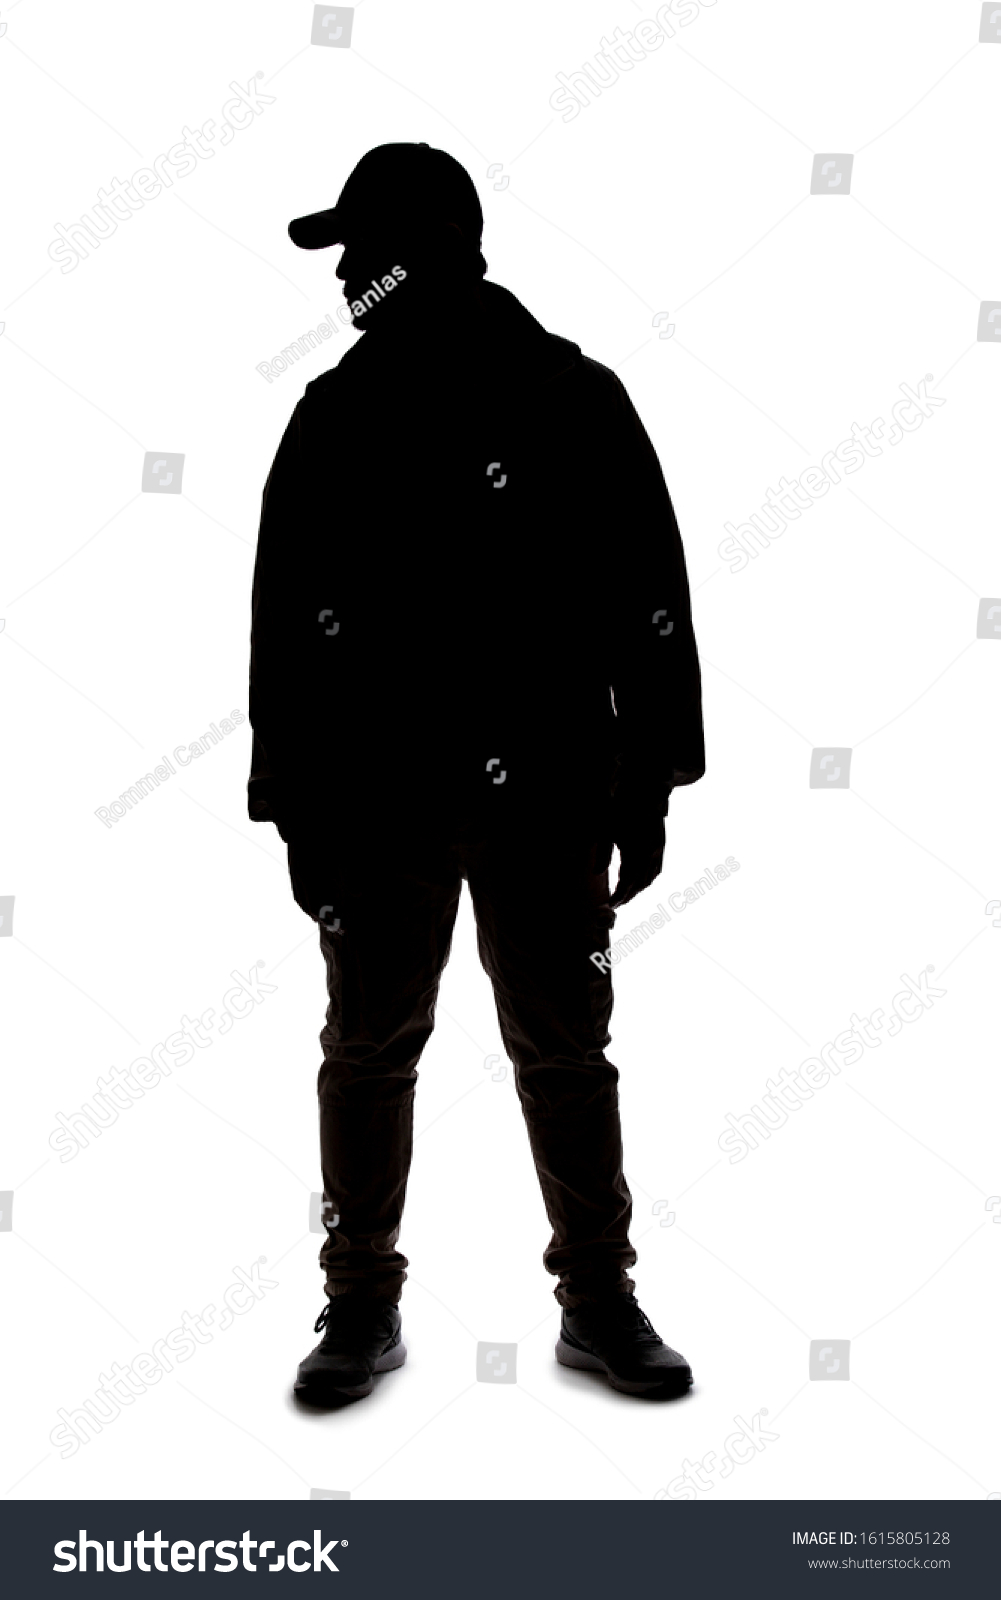 Silhouette of a man wearing a backpack looking like a traveler or hiker trekking.  He is patiently standing and waiting  #1615805128